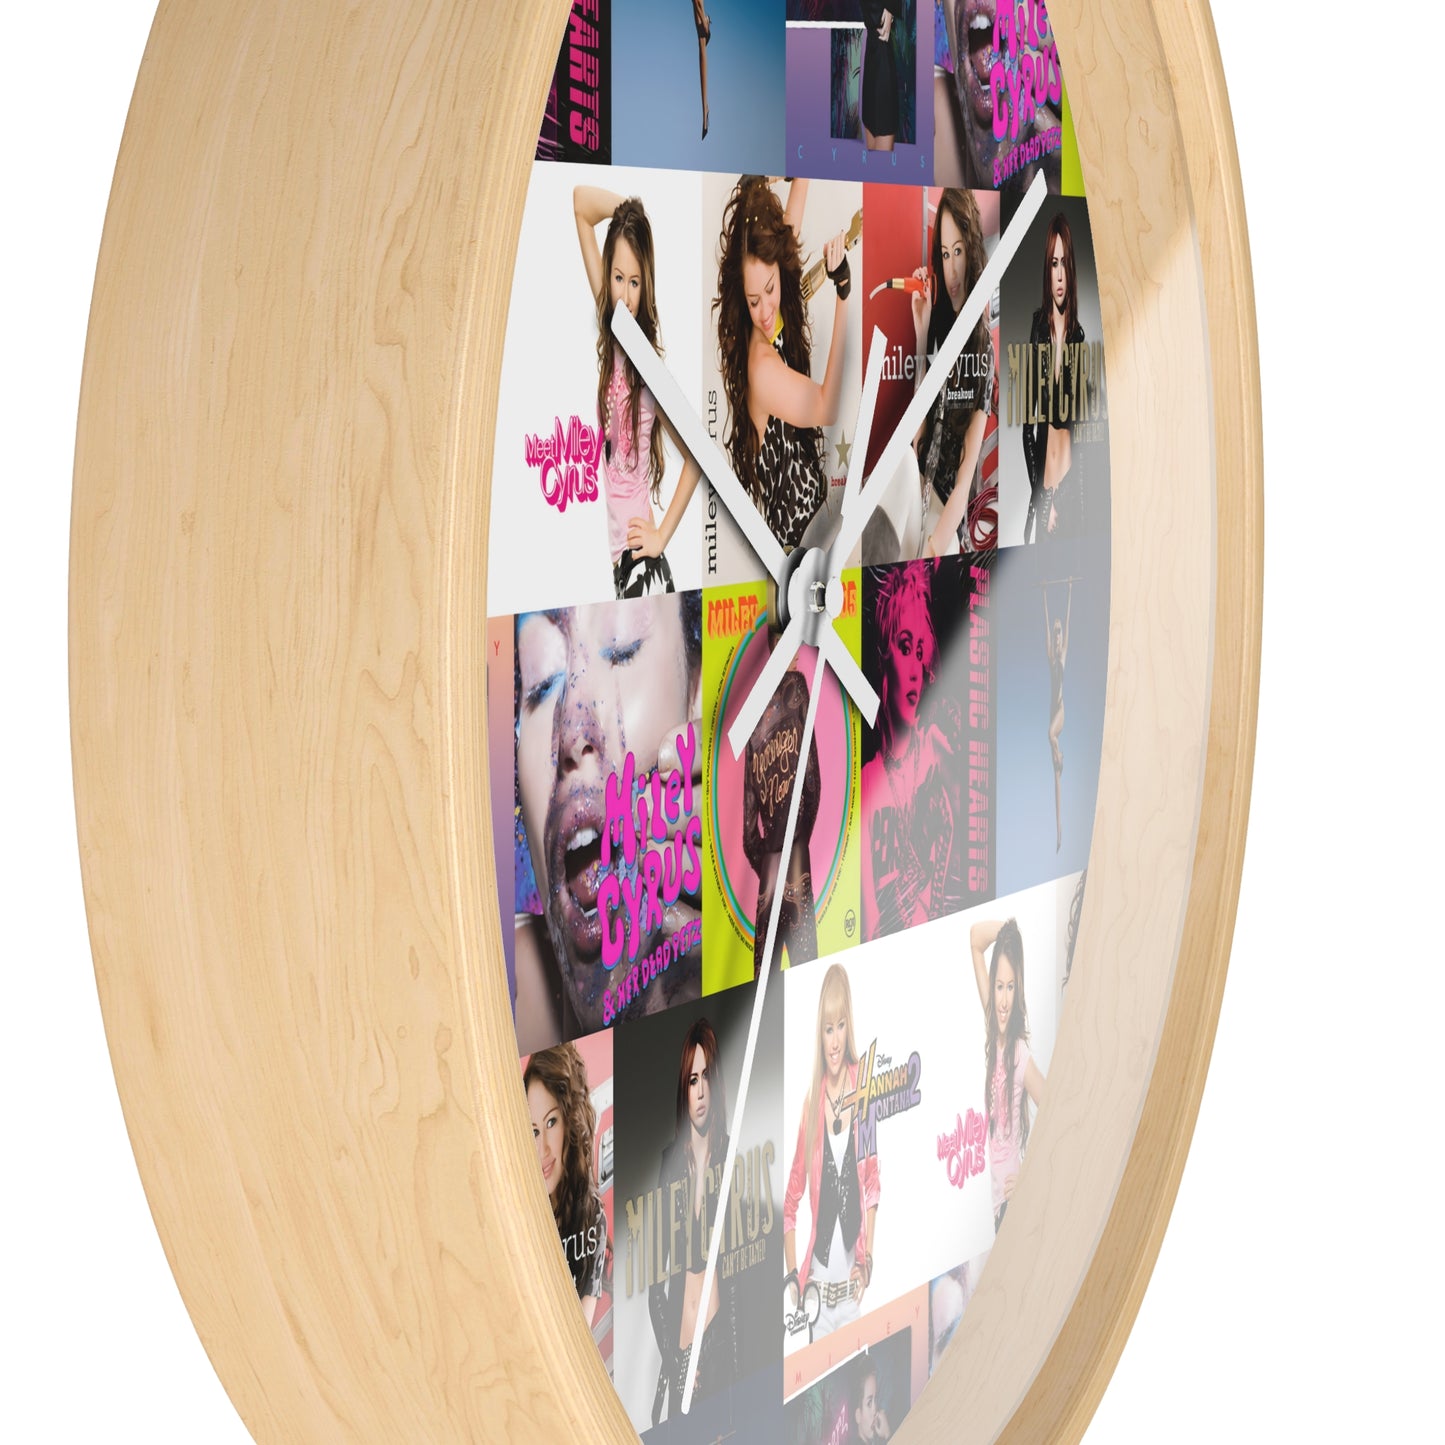 Miley Cyrus Album Cover Collage Round Wall Clock